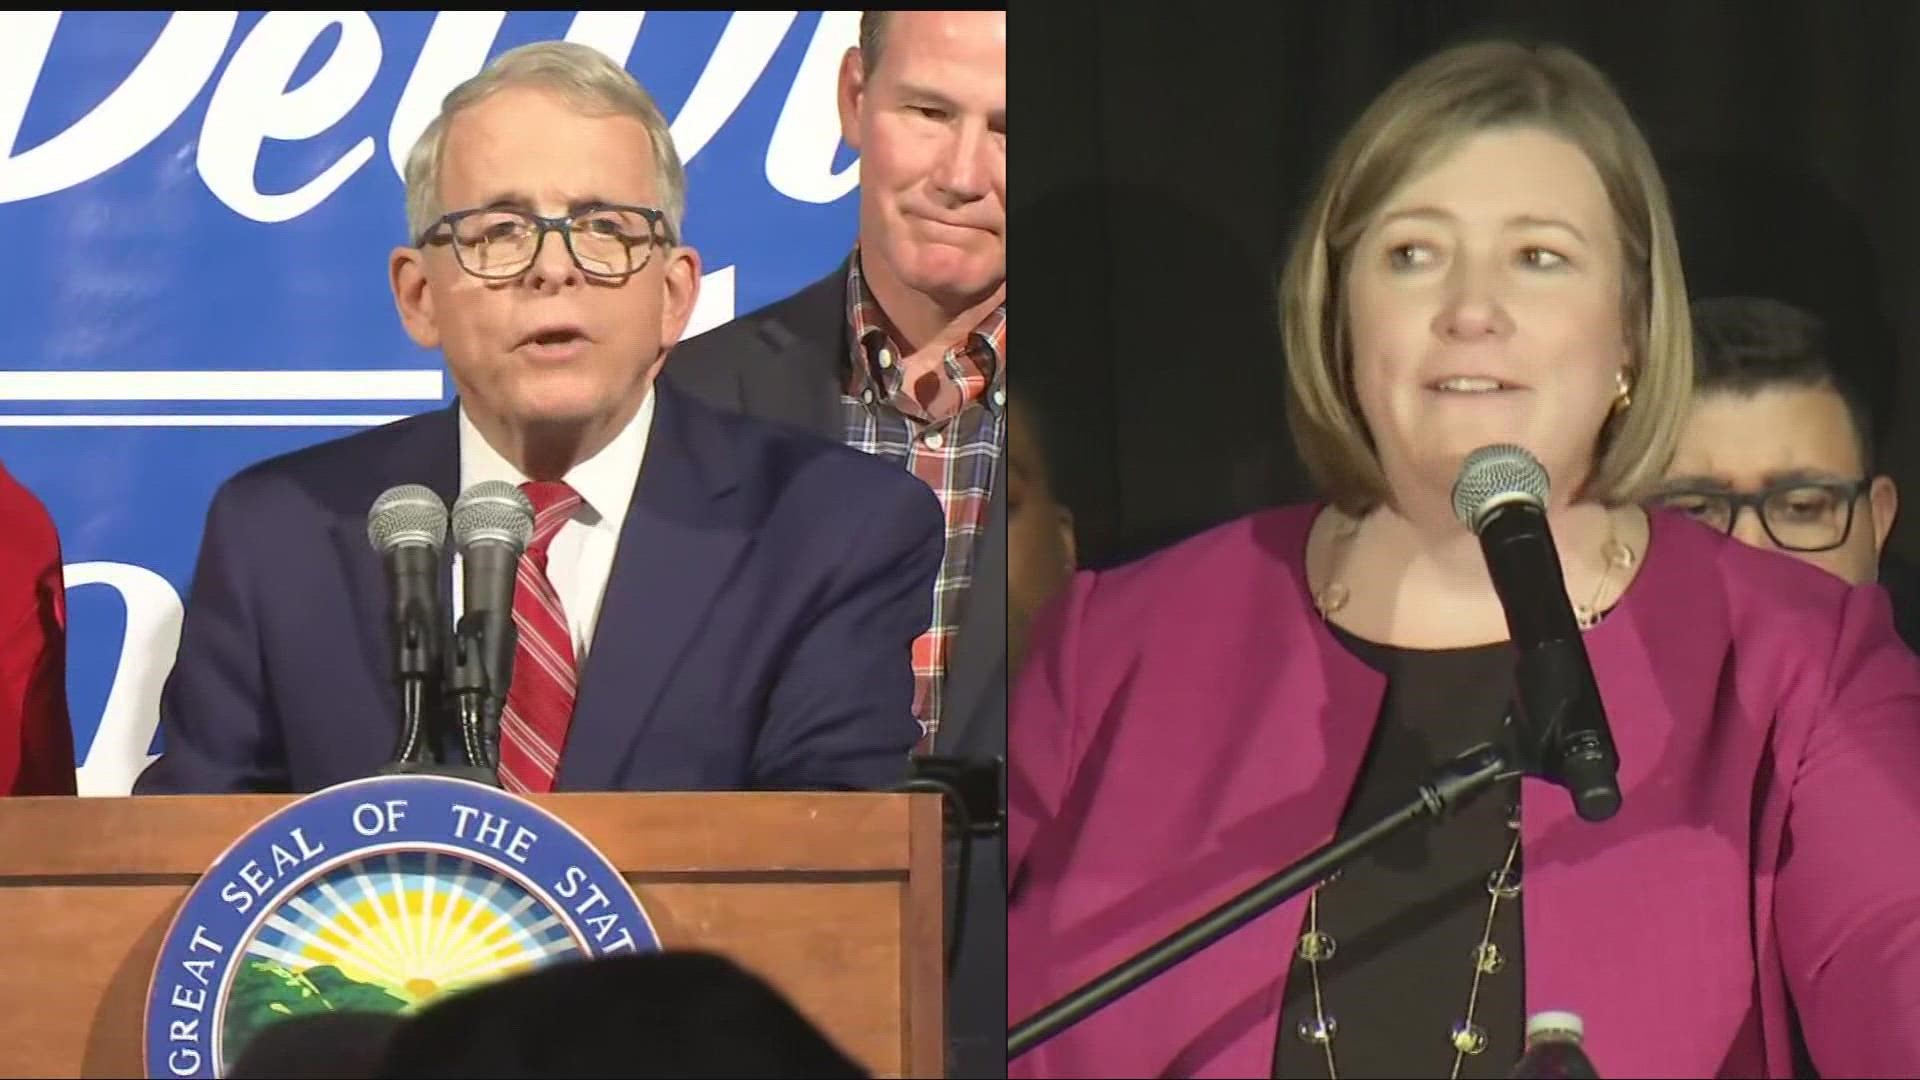 The incumbent Republican DeWine is considered a heavy favorite to win a second term, despite the Democrat Whaley attacking him on abortion and gun policy.